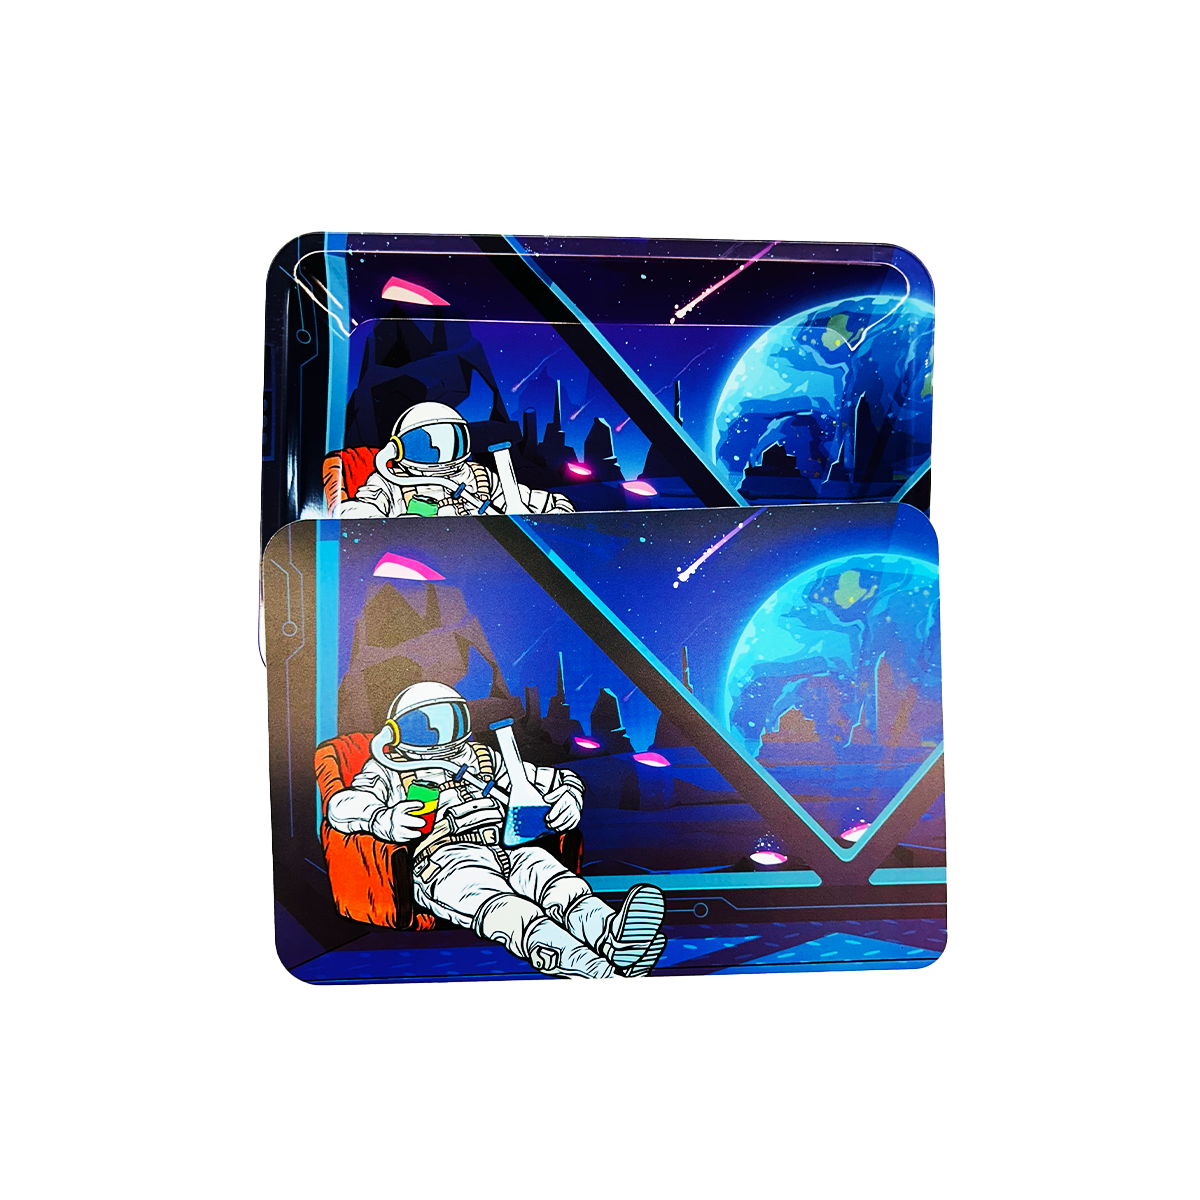 Astronaut Magnetic Lid Rolling Tray Small - Size 7in x 5in